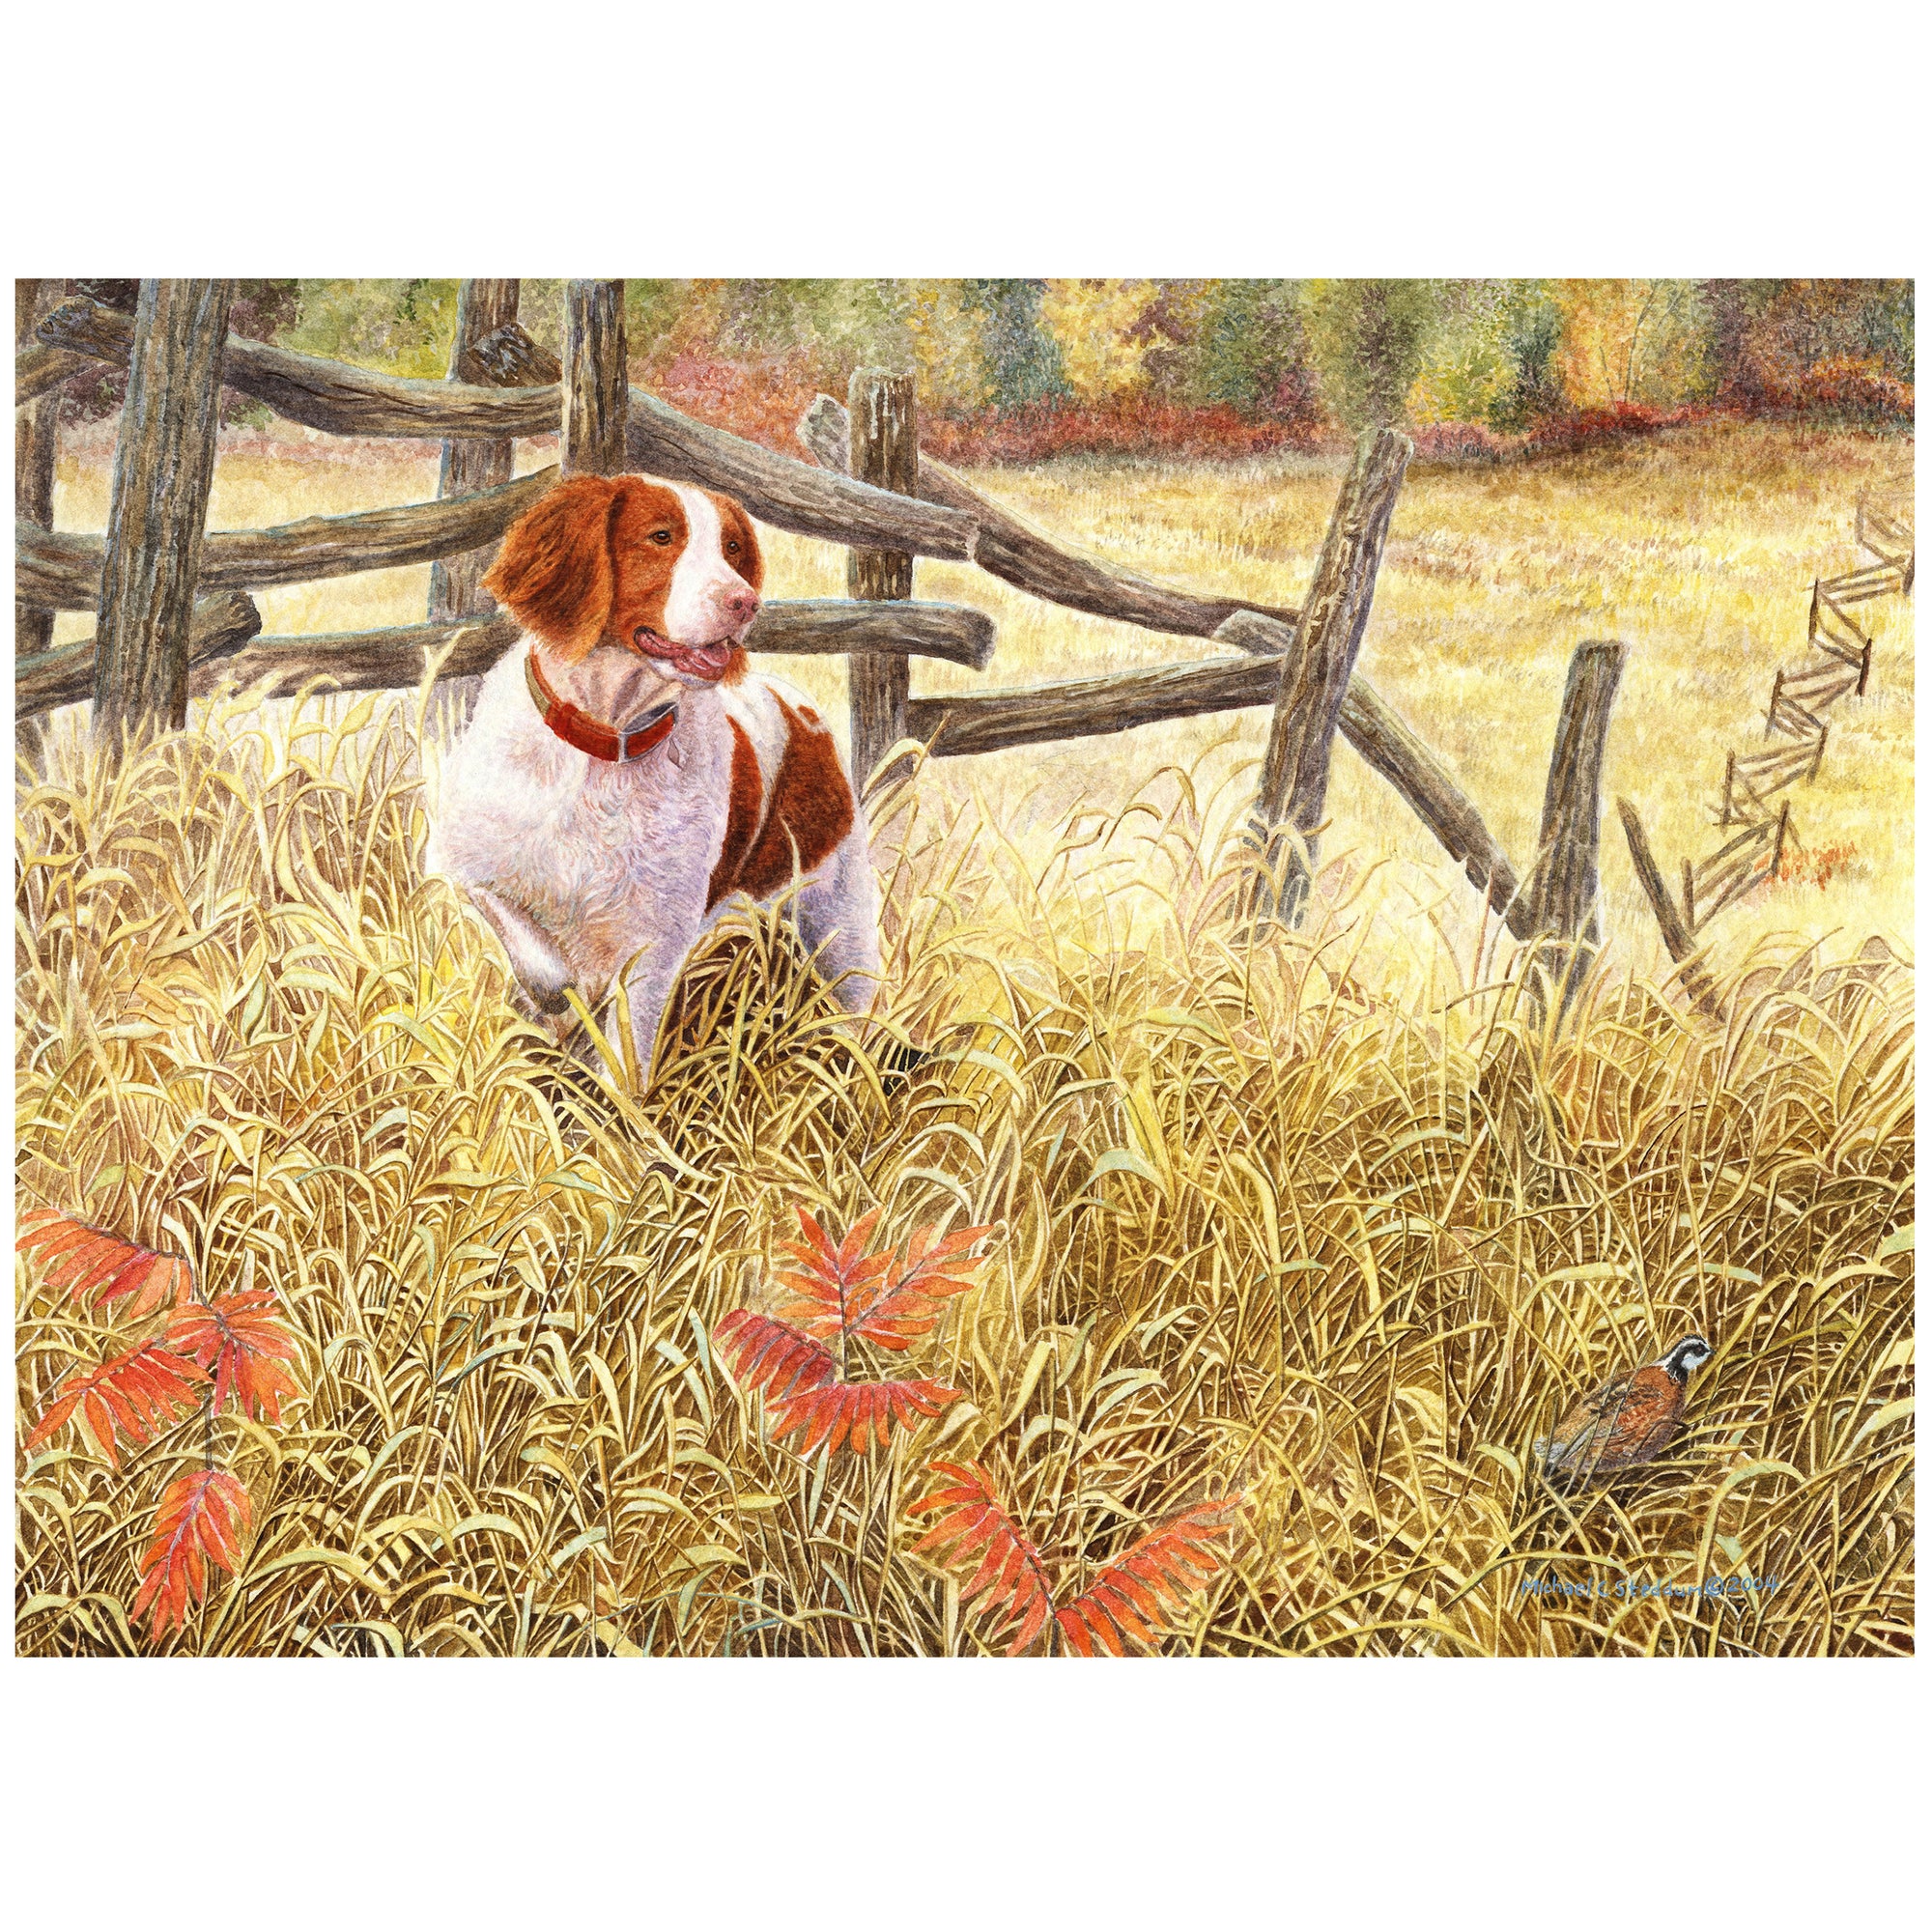 Brittany Art Reproduction Print – “Brittany and Quail” by Michael Steddum - Limited Edition Signed and Numbered Brittany Dog Art Print